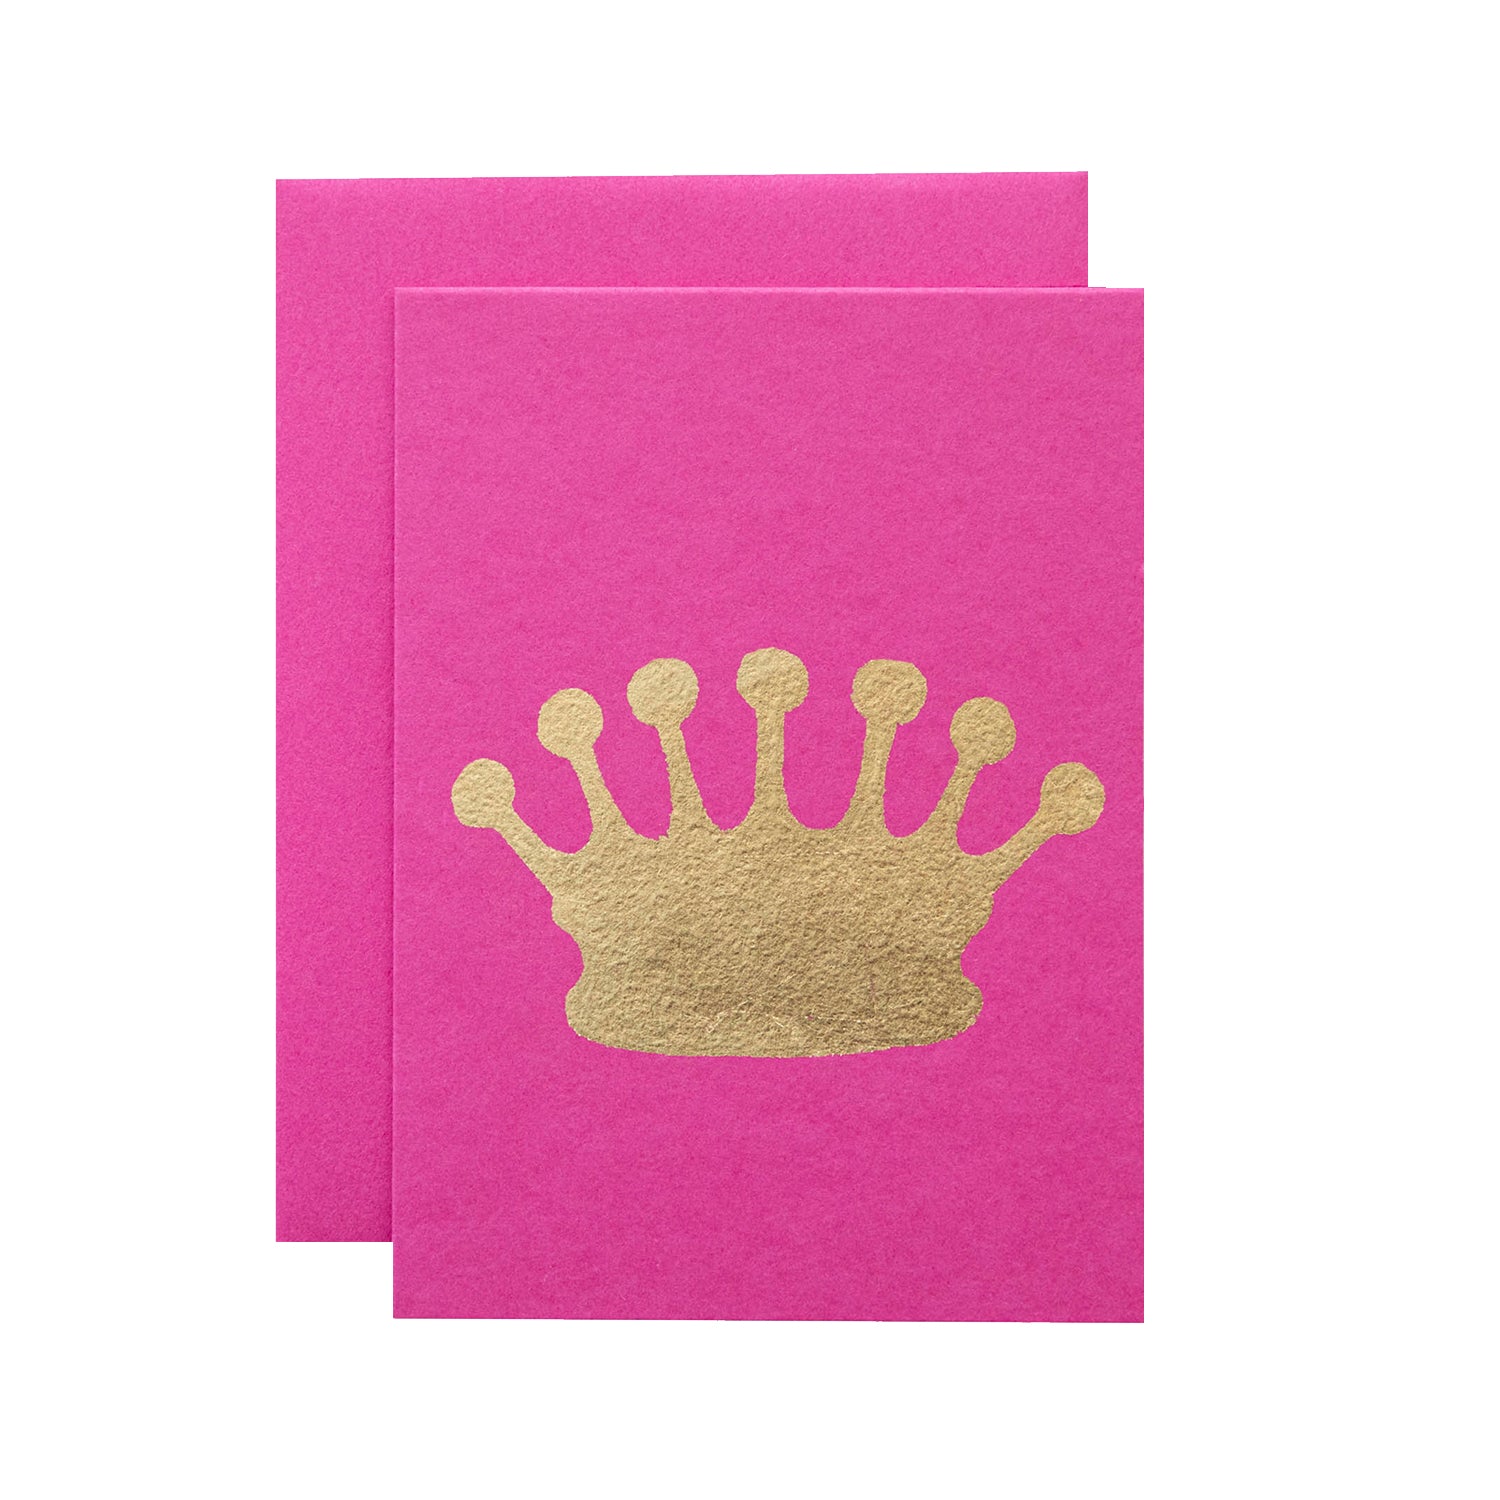 A Pink Crown Card by Hester &amp; Cook with a gold crown on it.